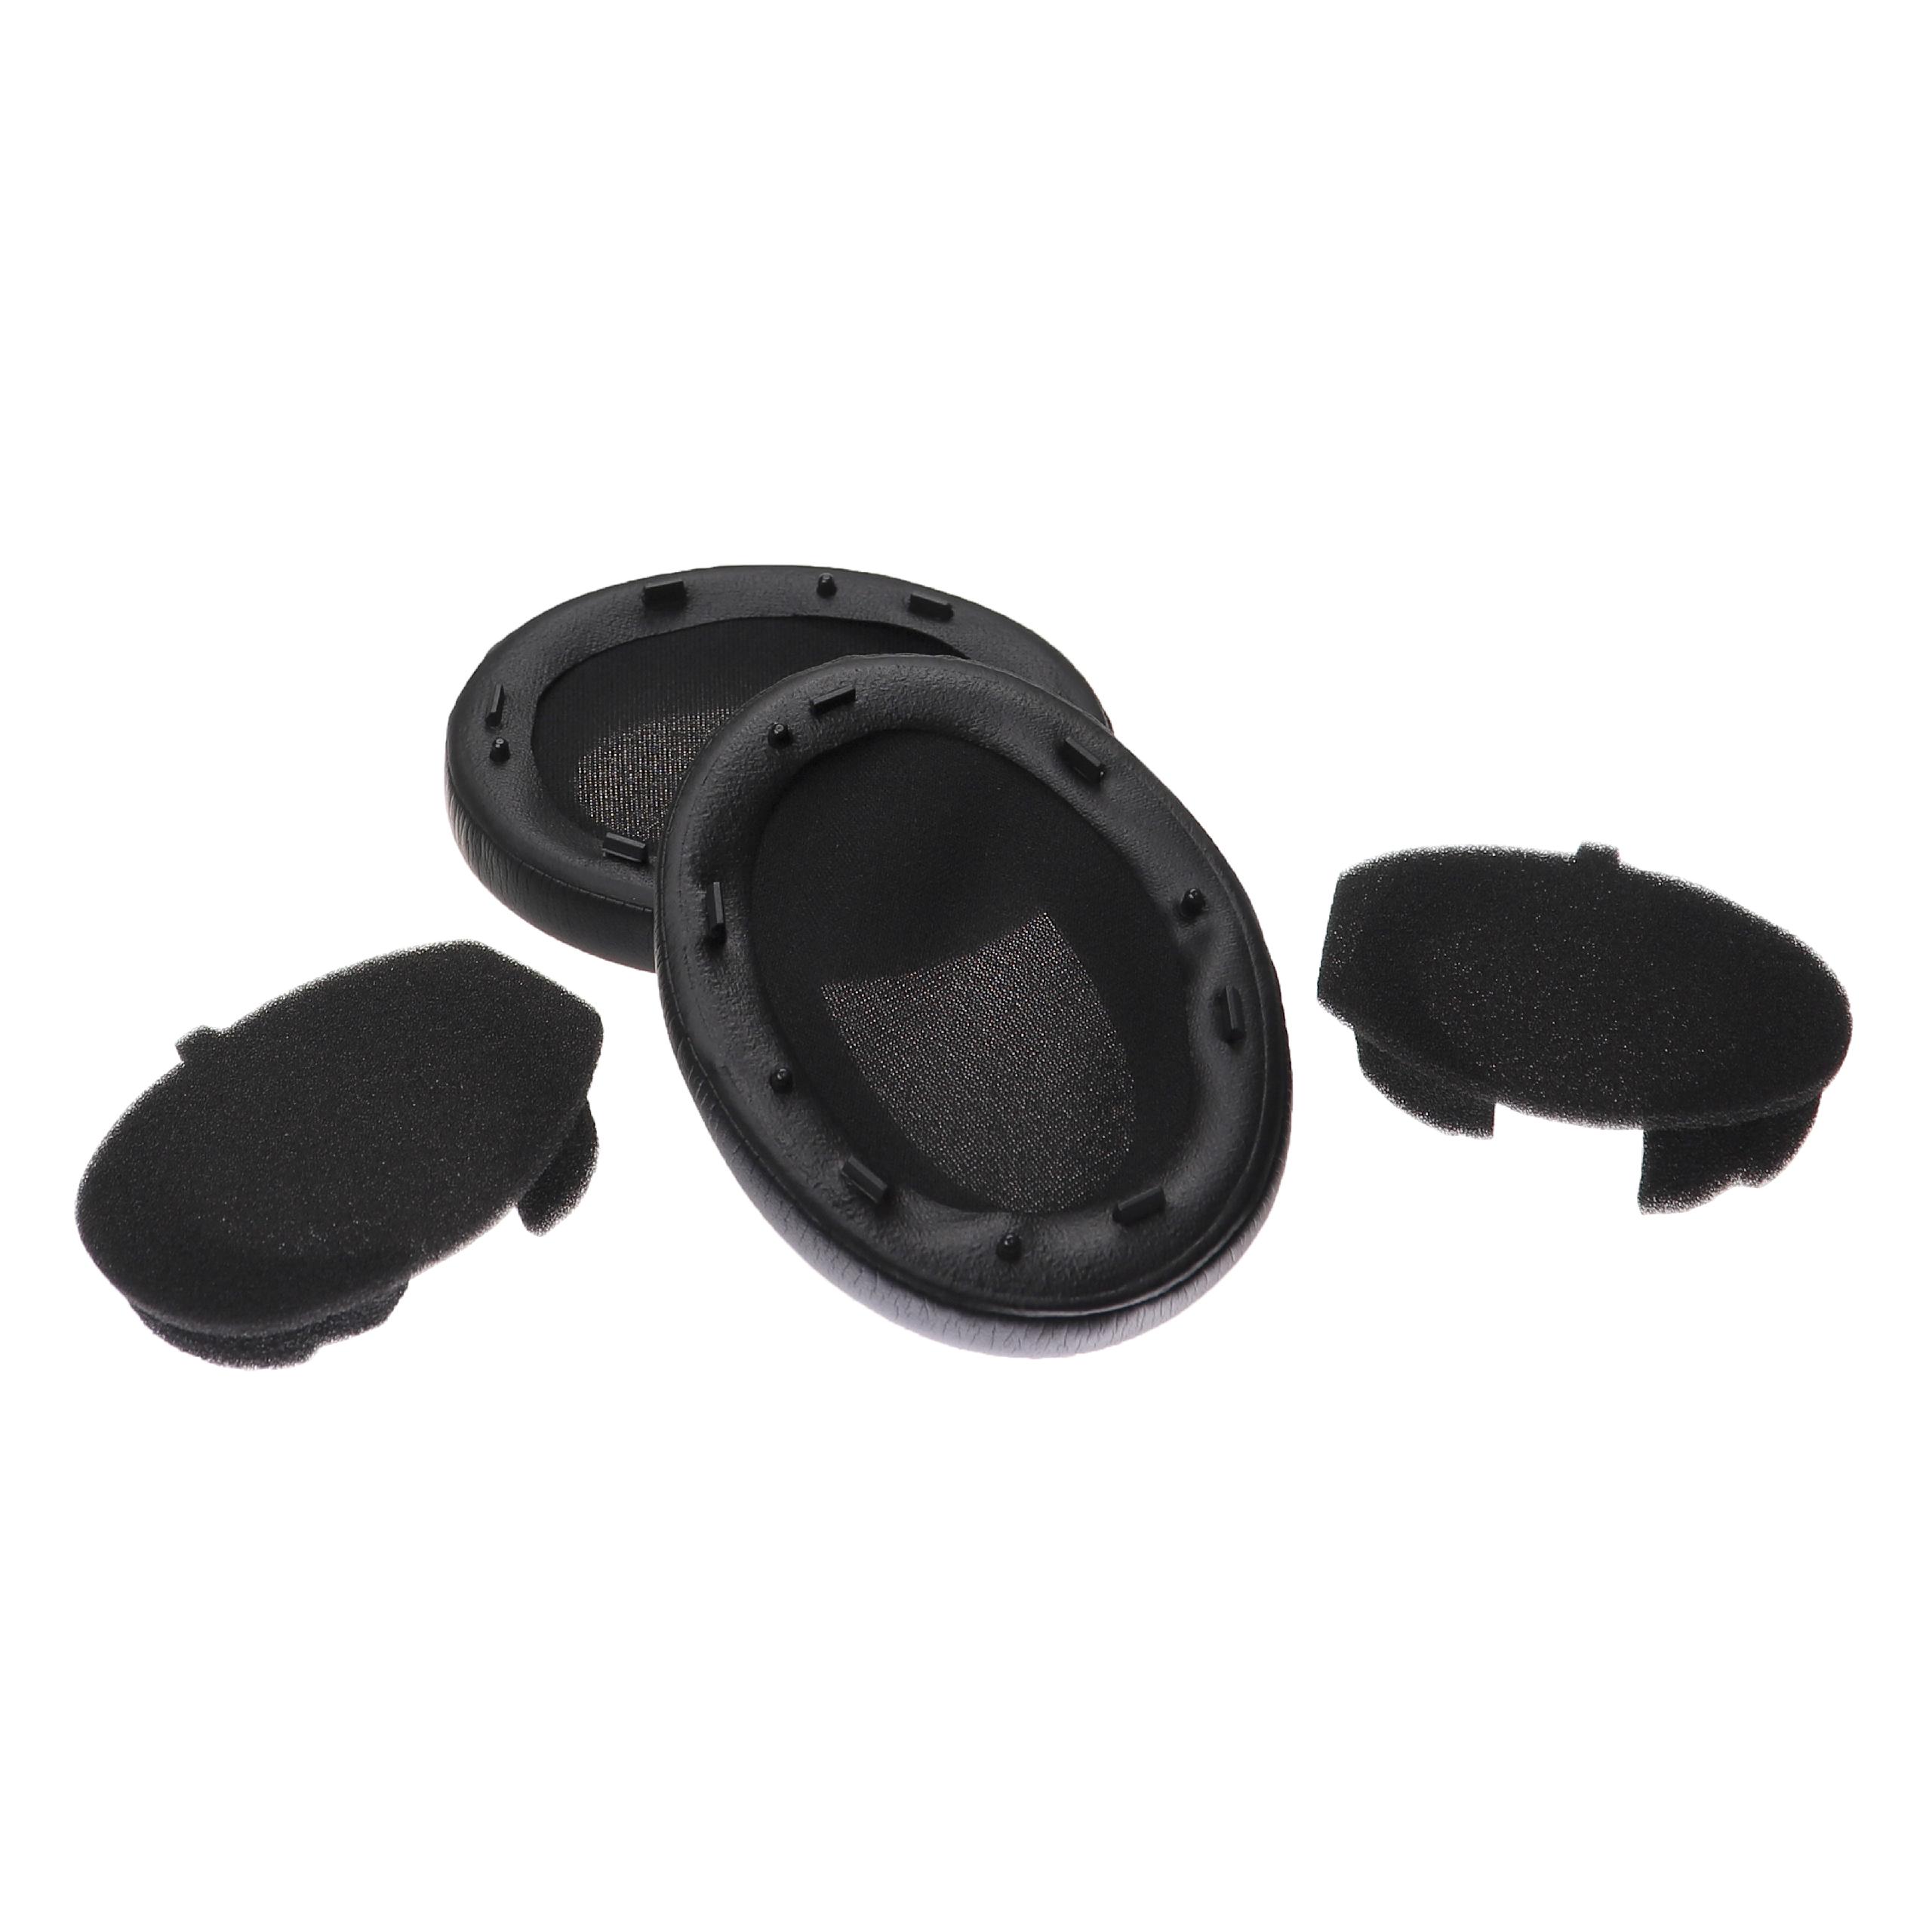 Ear Pads suitable for Sony WH-1000XM3 Headphones etc. - with Memory Foam, Soft Material, 28 mm thick